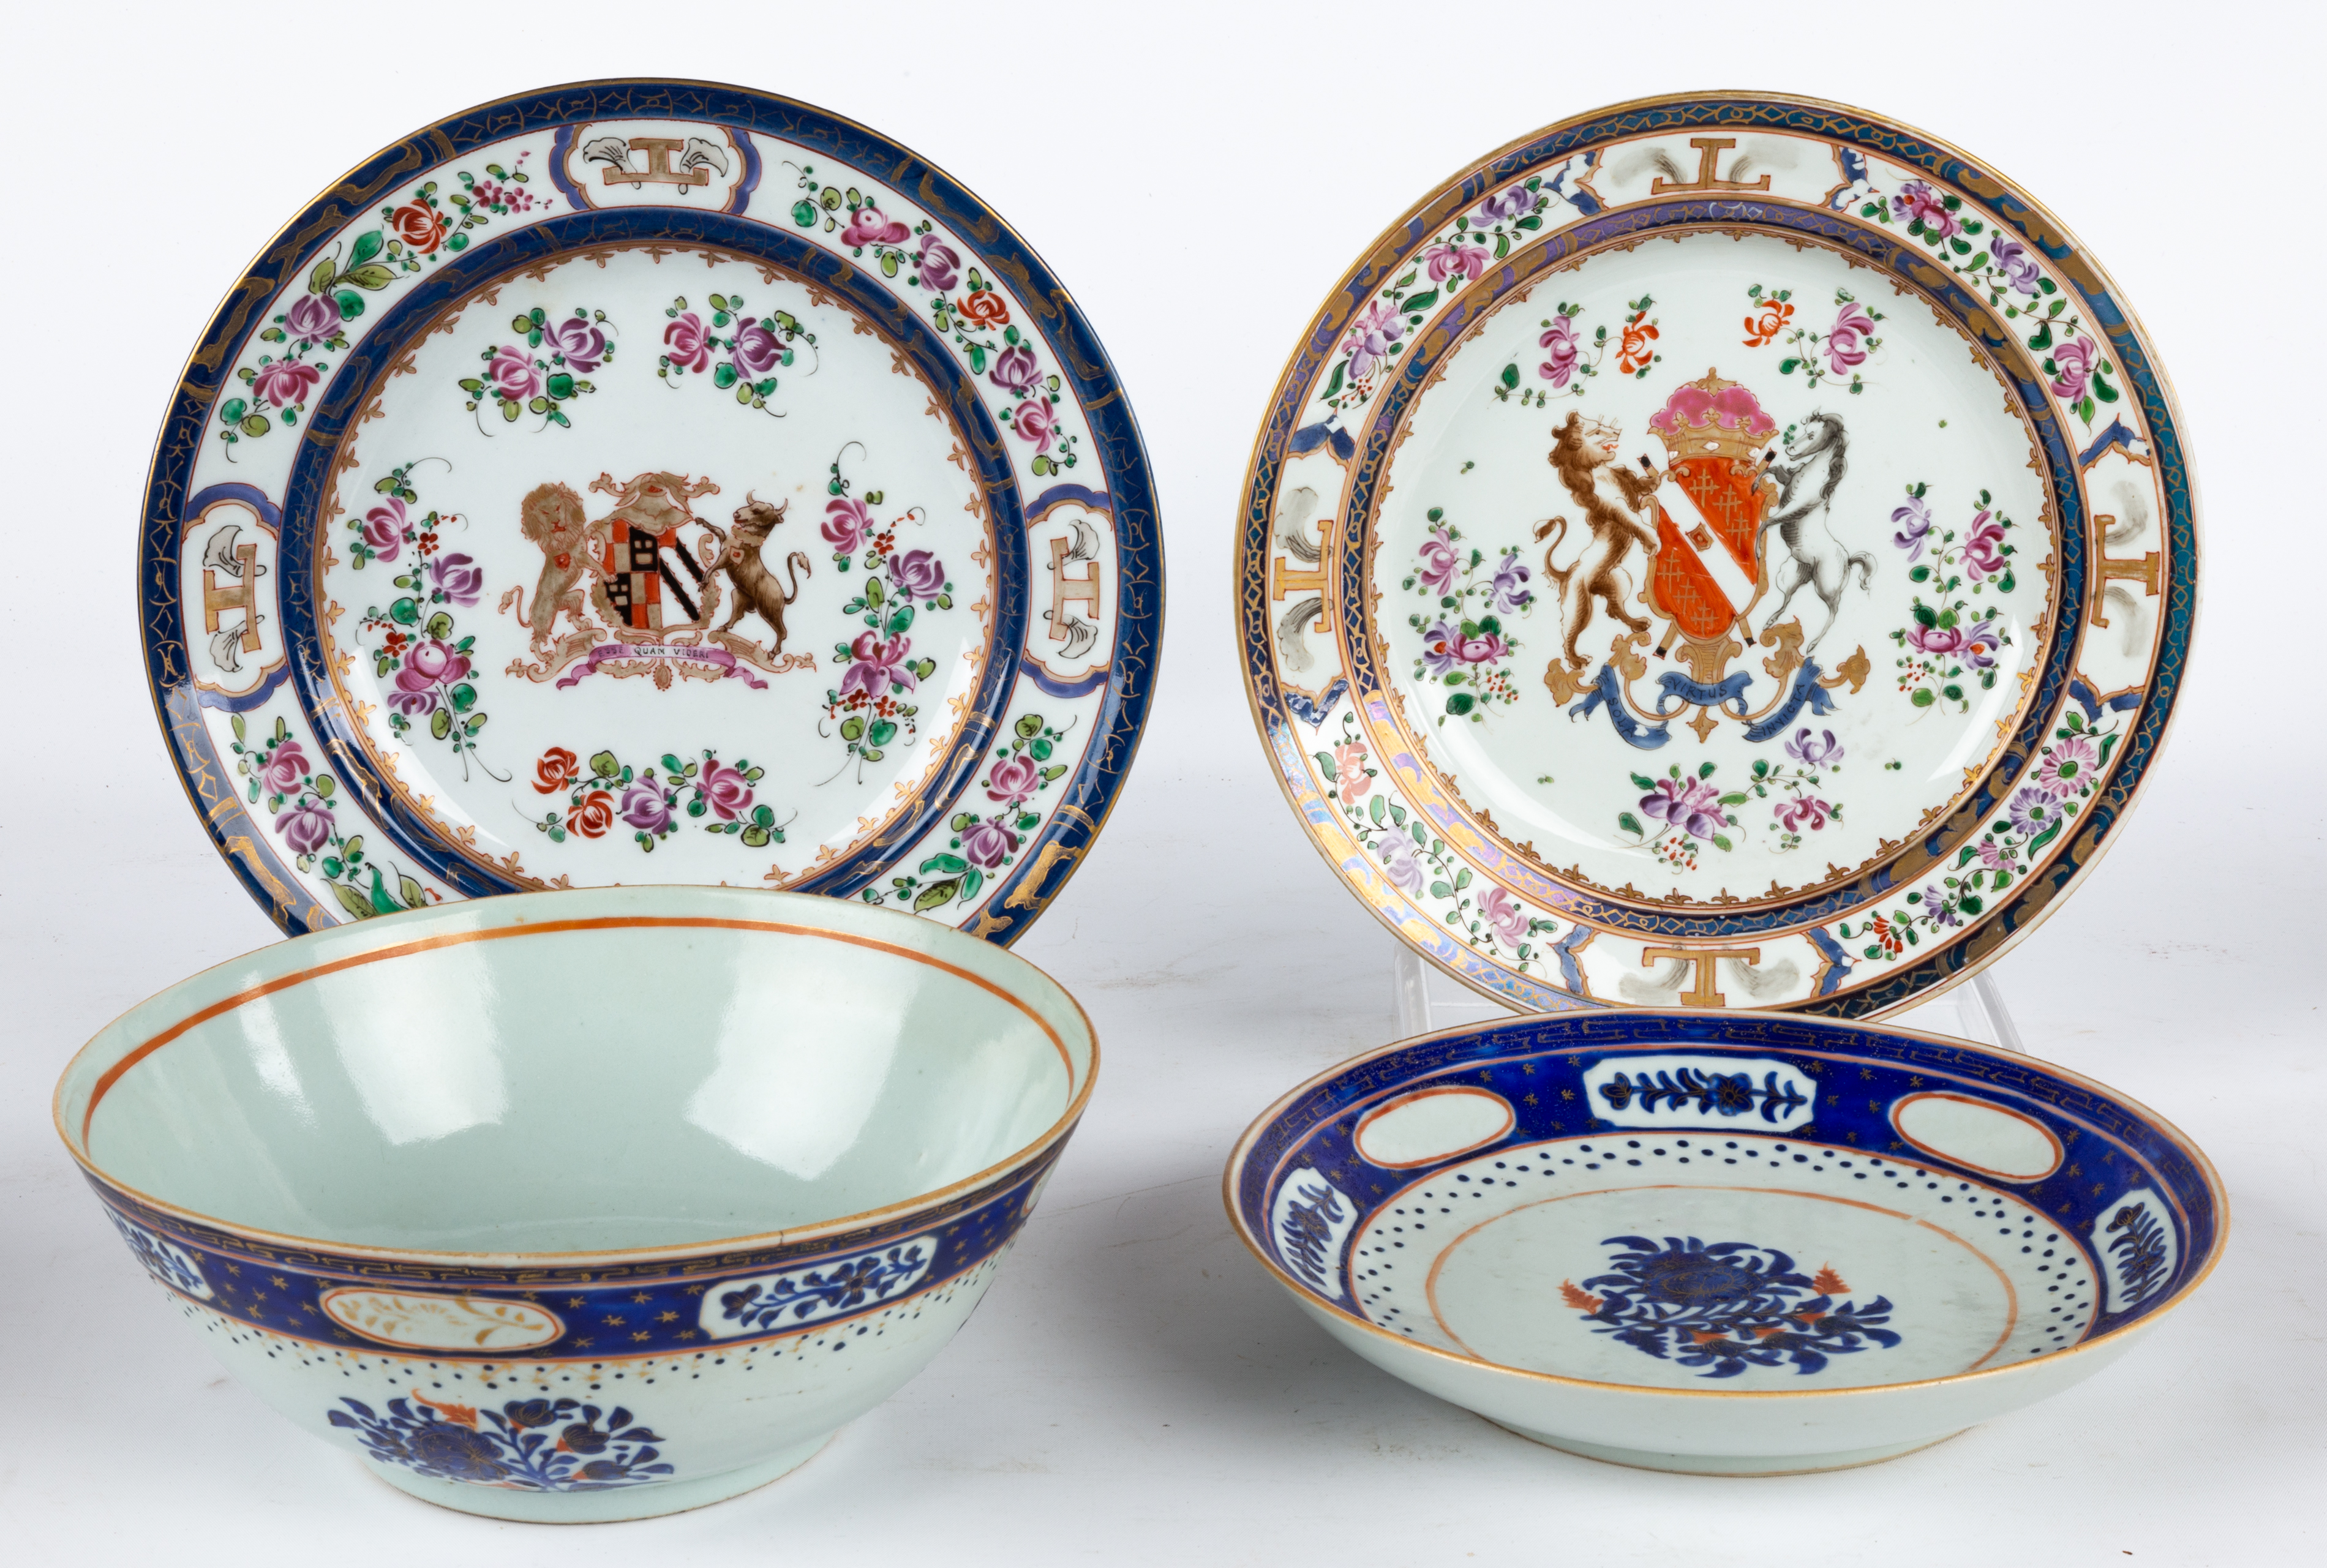 CHINESE EXPORT PLATES AND BOWL 19th